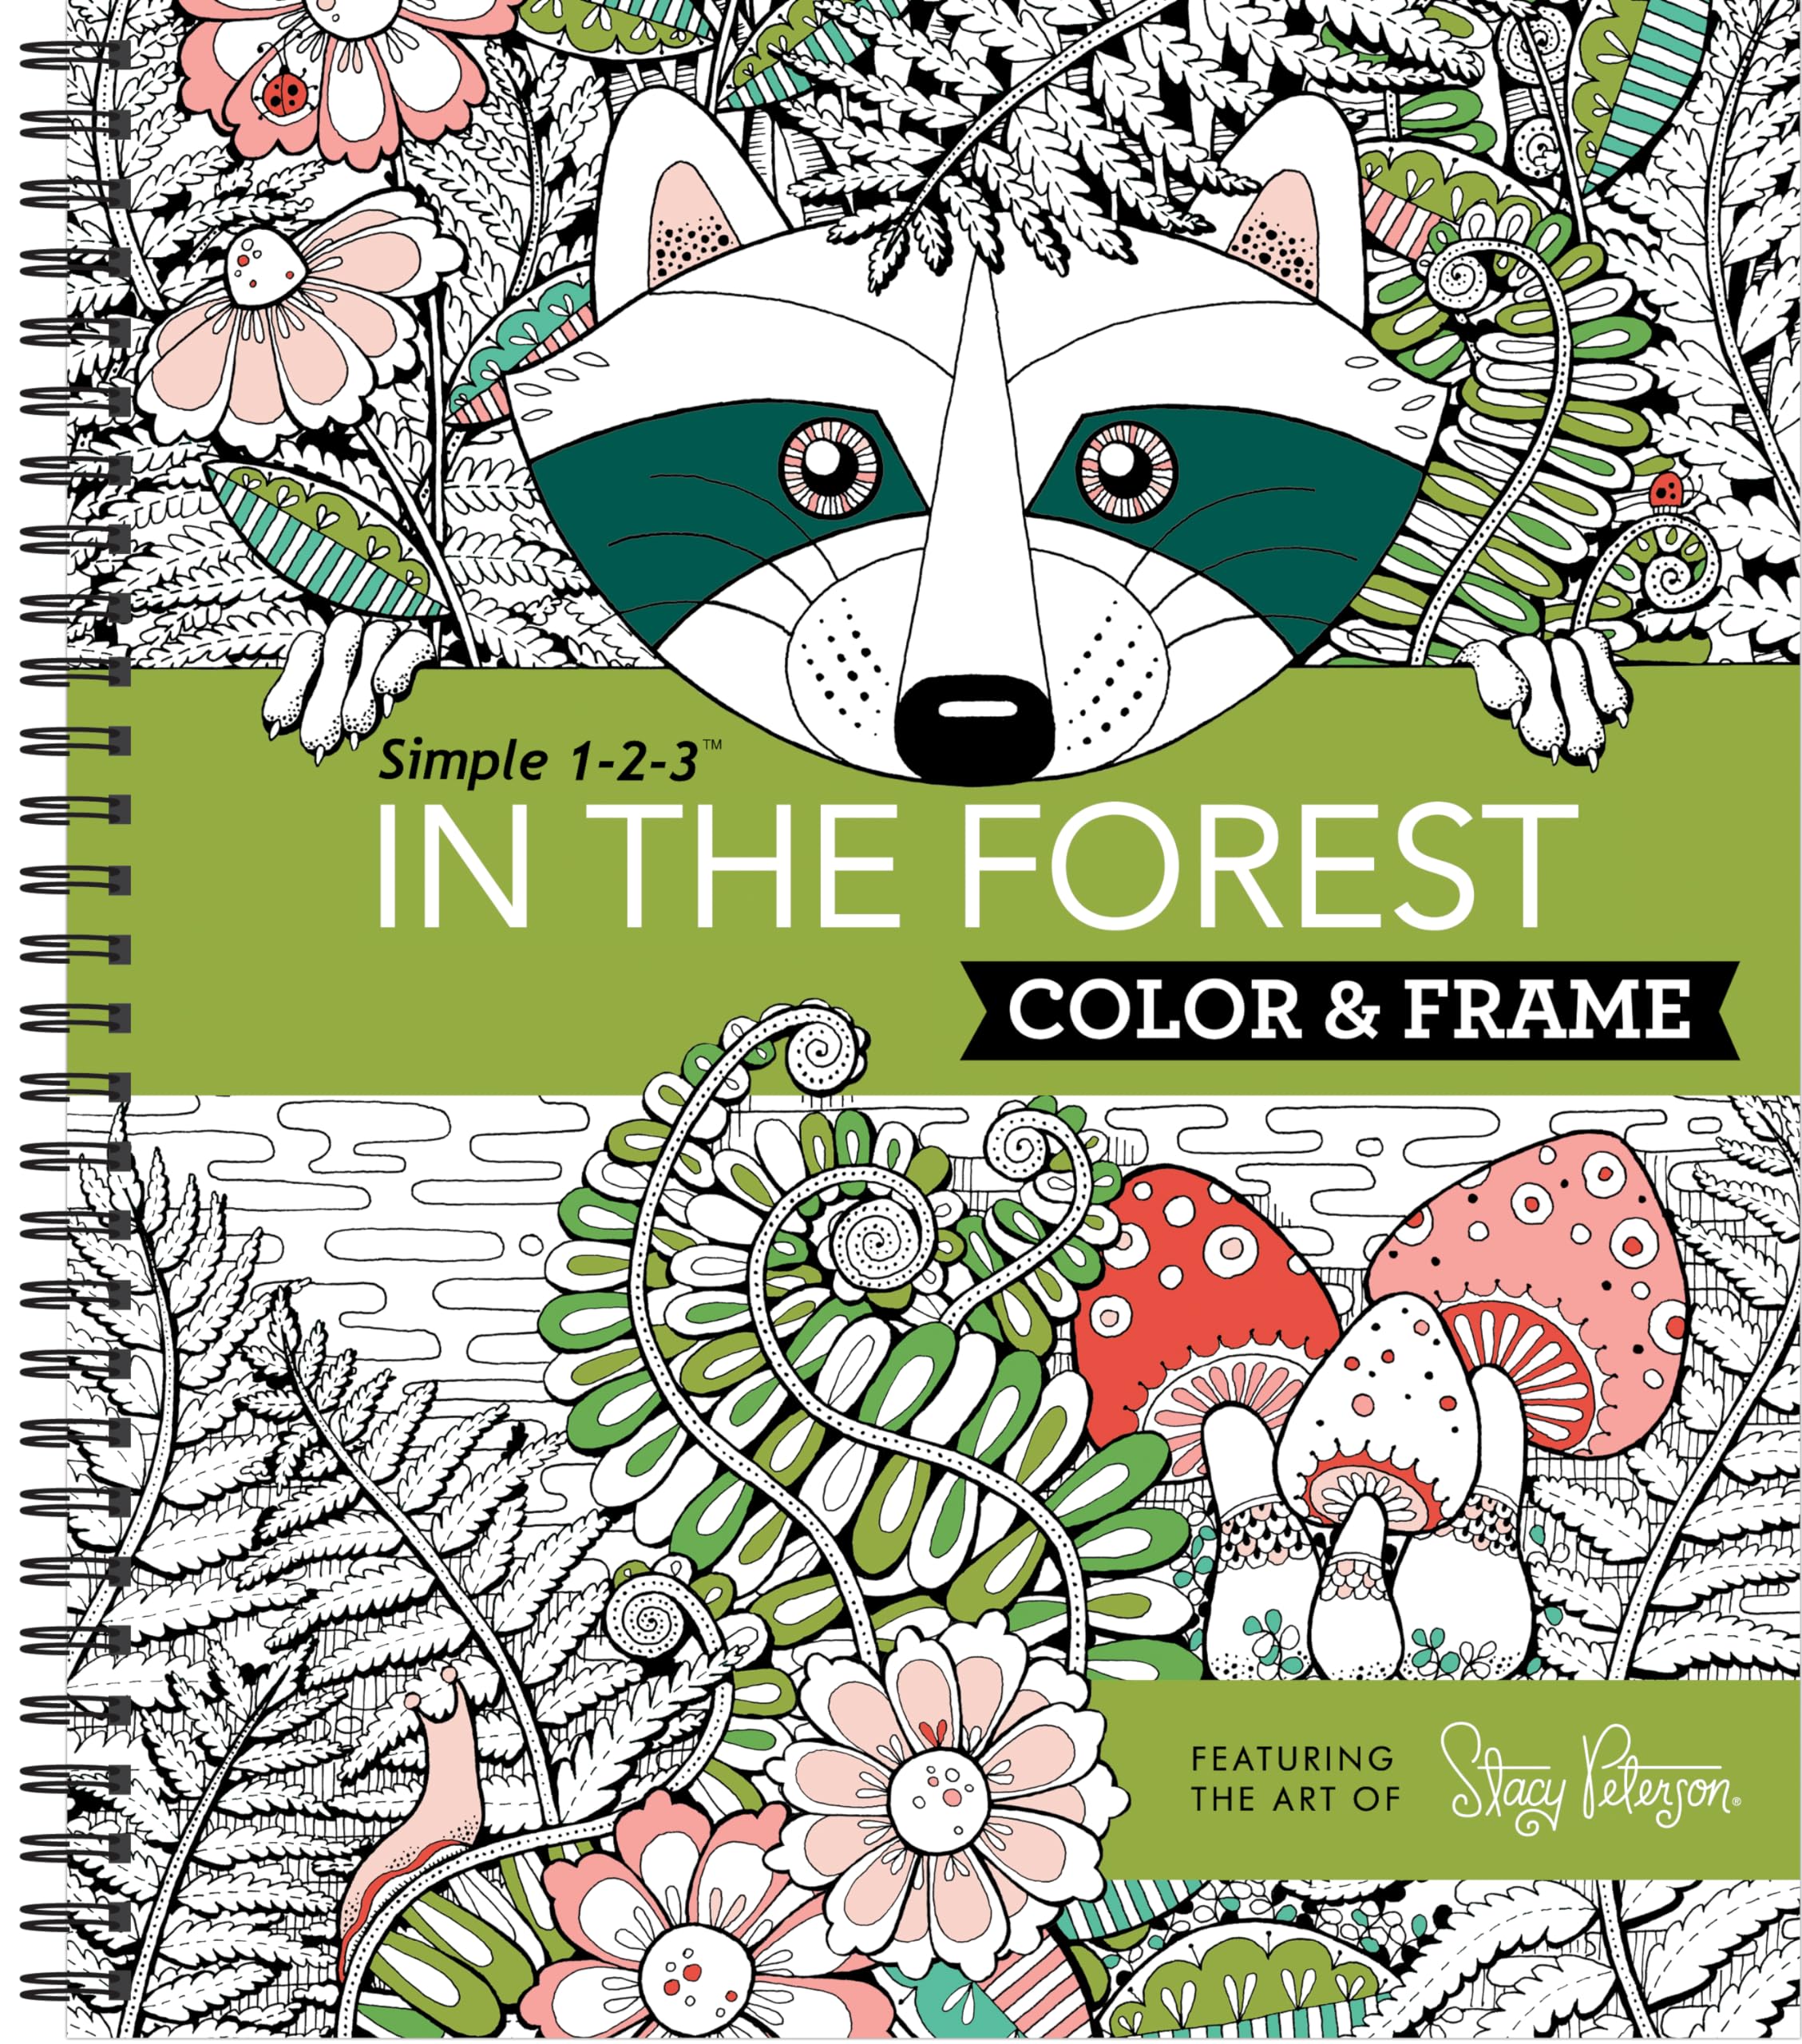 Color & Frame - In the Forest (Adult Coloring Book) by New Seasons